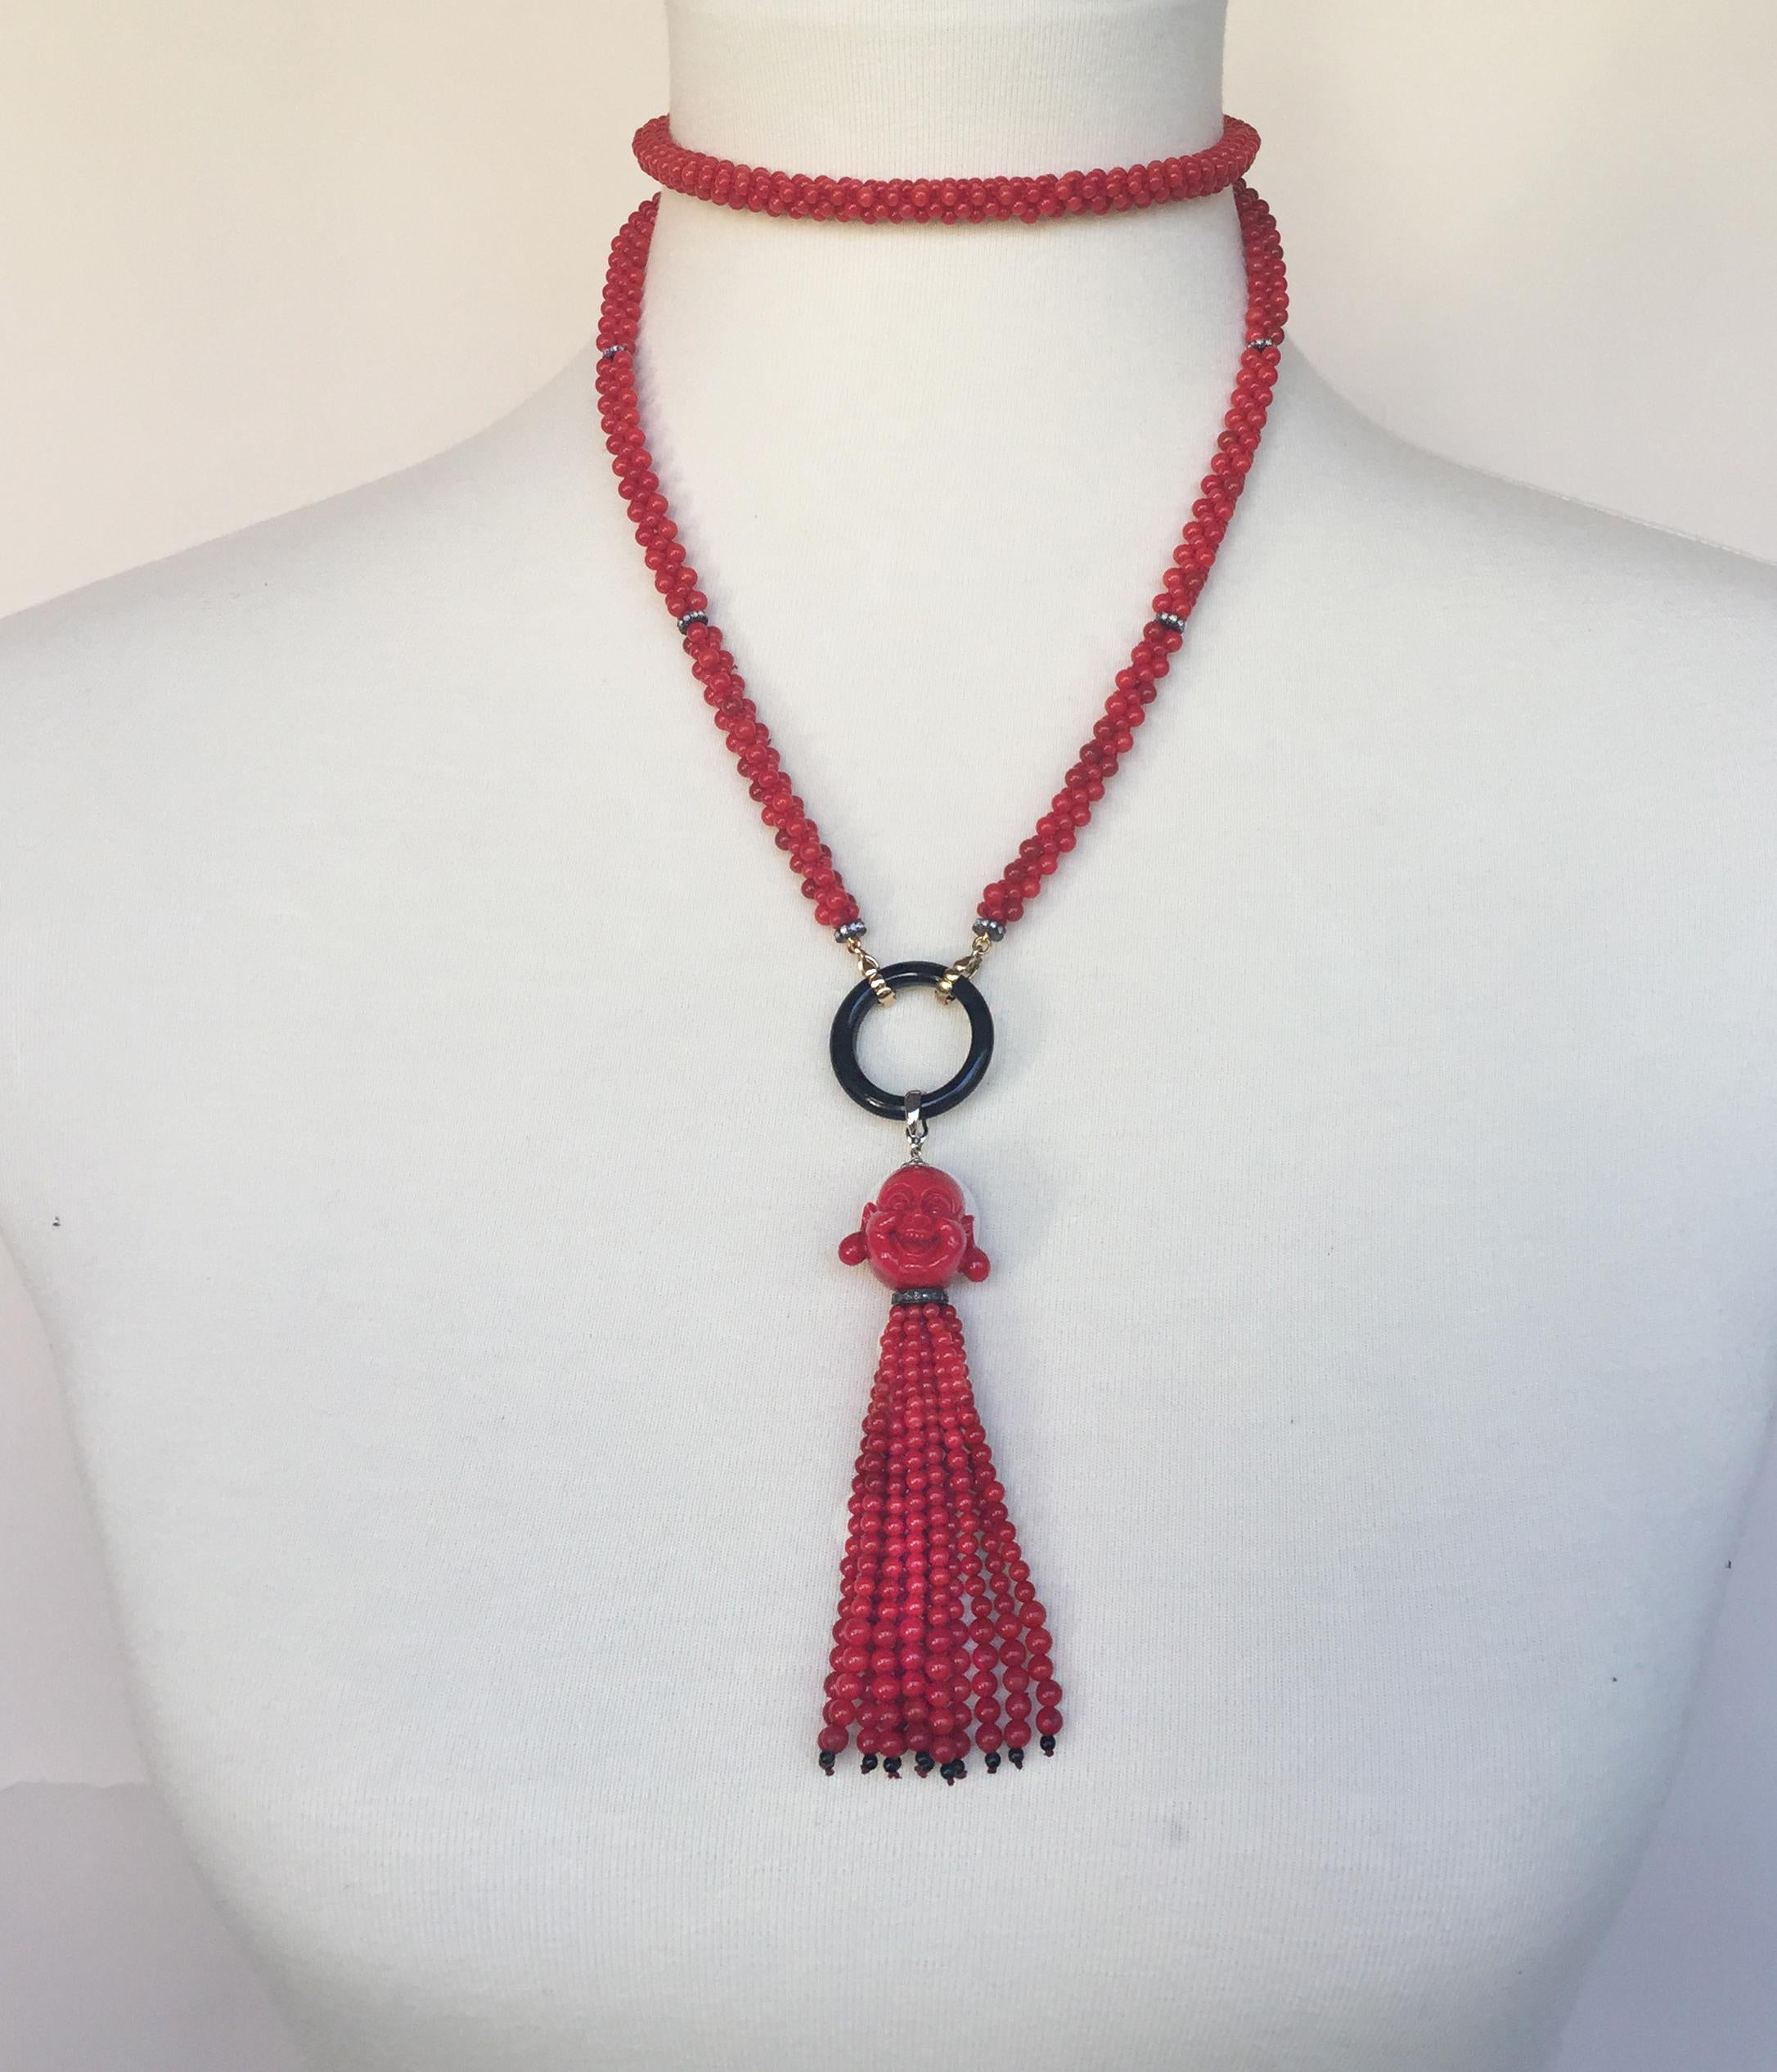 Bead Marina j Coral, Diamond, and Onyx Woven Necklace with Coral Tassel and 14K Gold